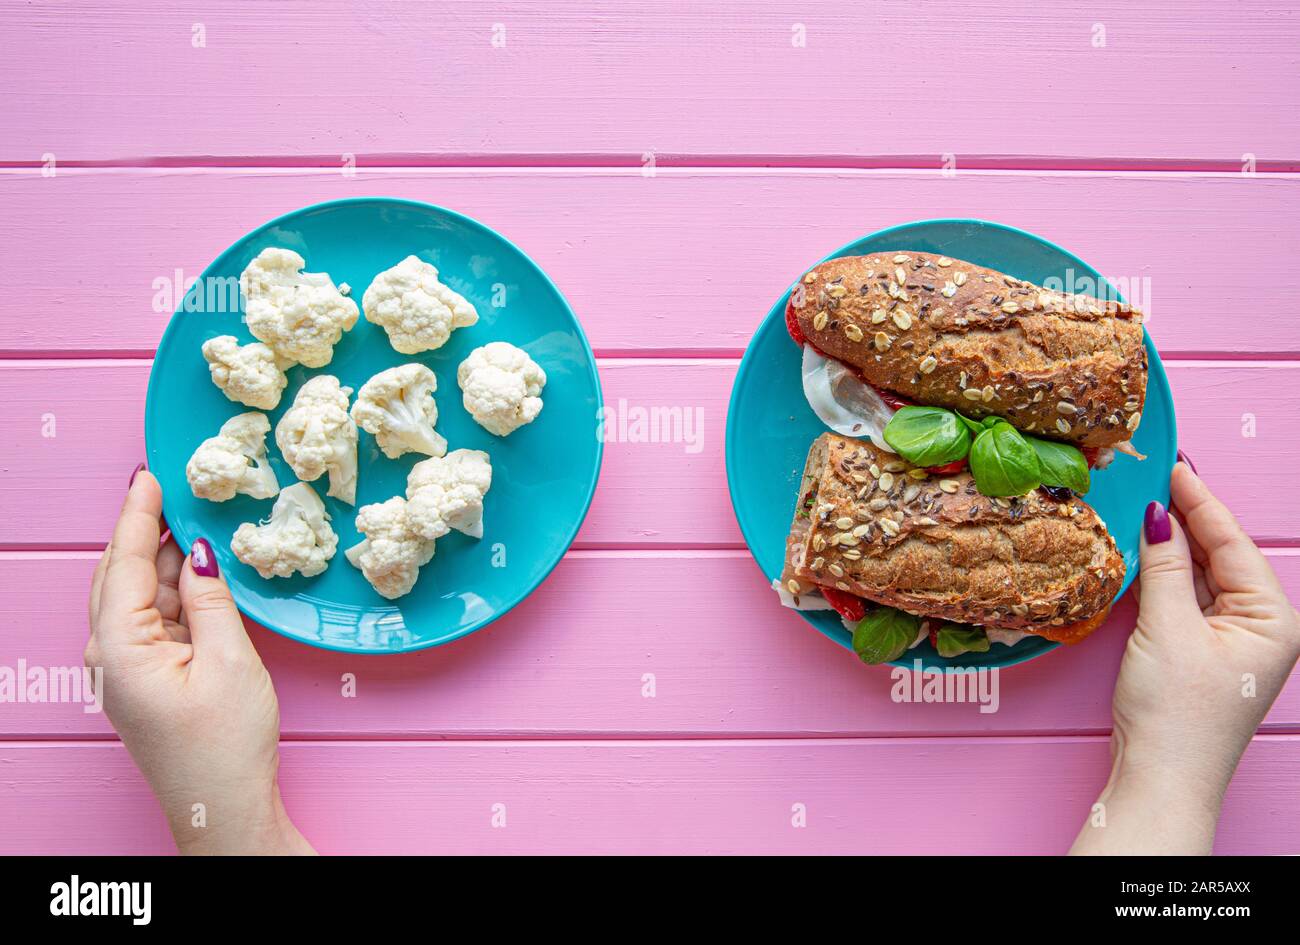 Female hands holding two plates and choosing food to eat between vegetables or sandwich, diet concept. Stock Photo